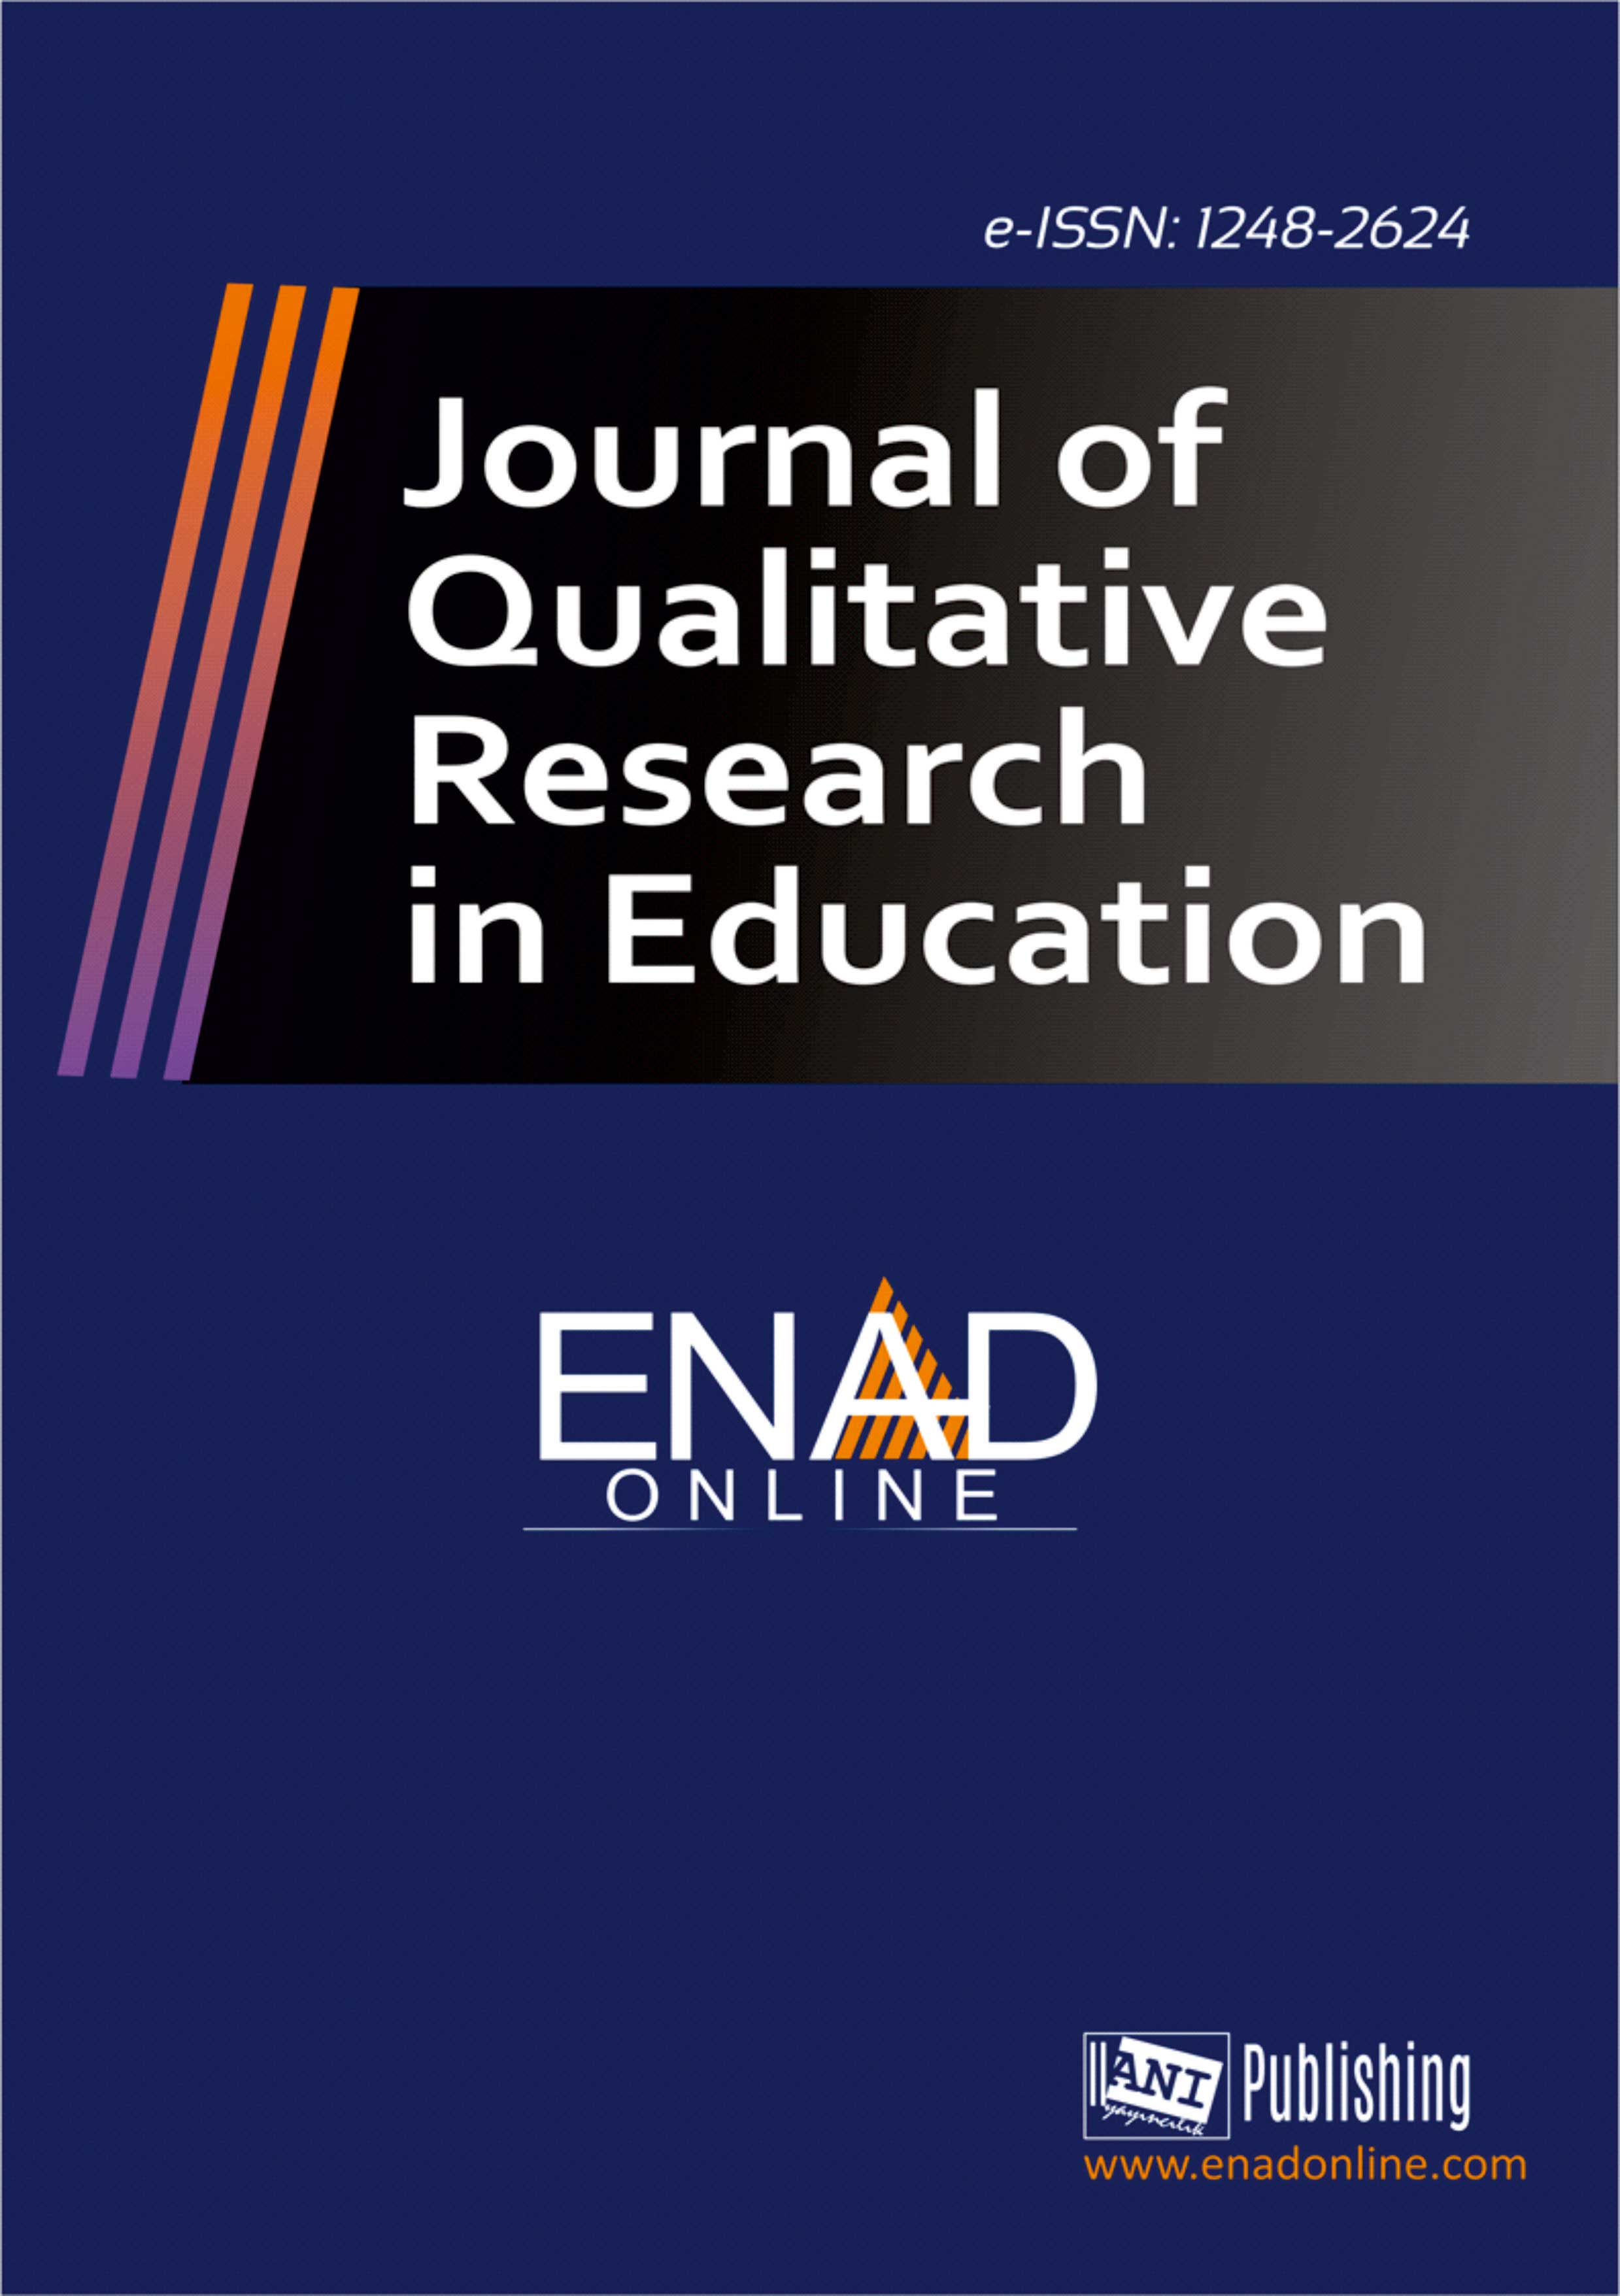 					View Vol. 7 Issue 1 (2019): Journal of Qualitative Research in Education
				